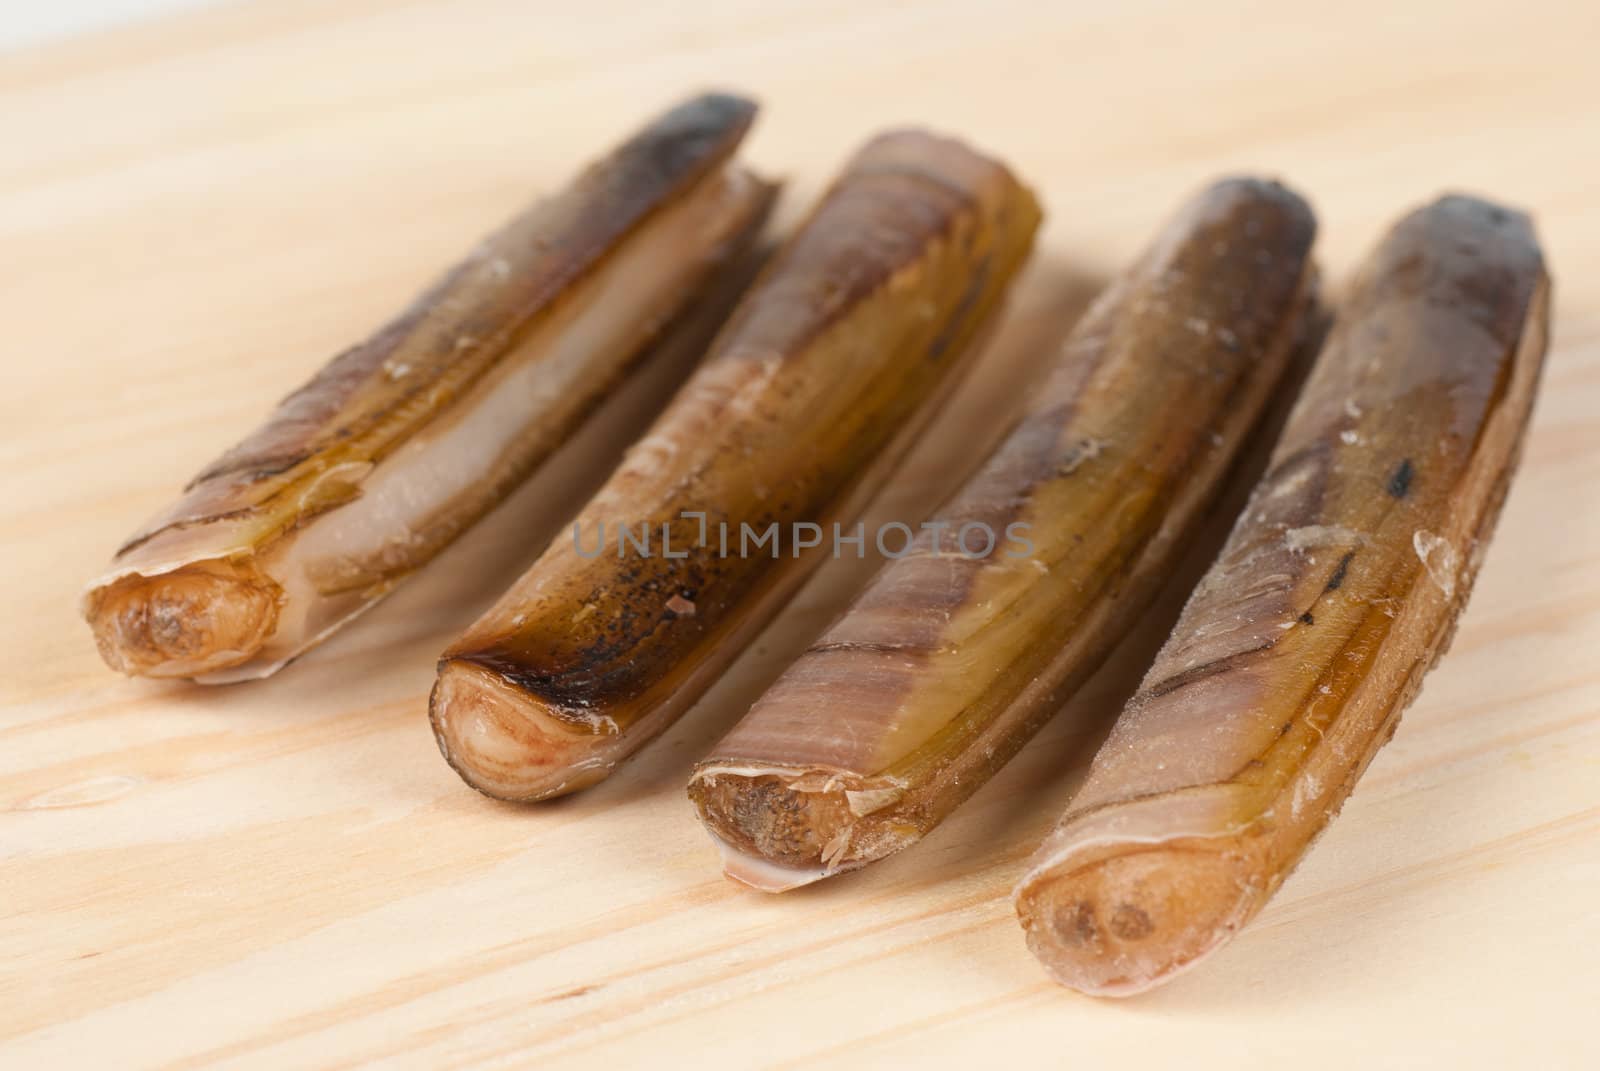 Fresh razor clams in their shell on a wooden board